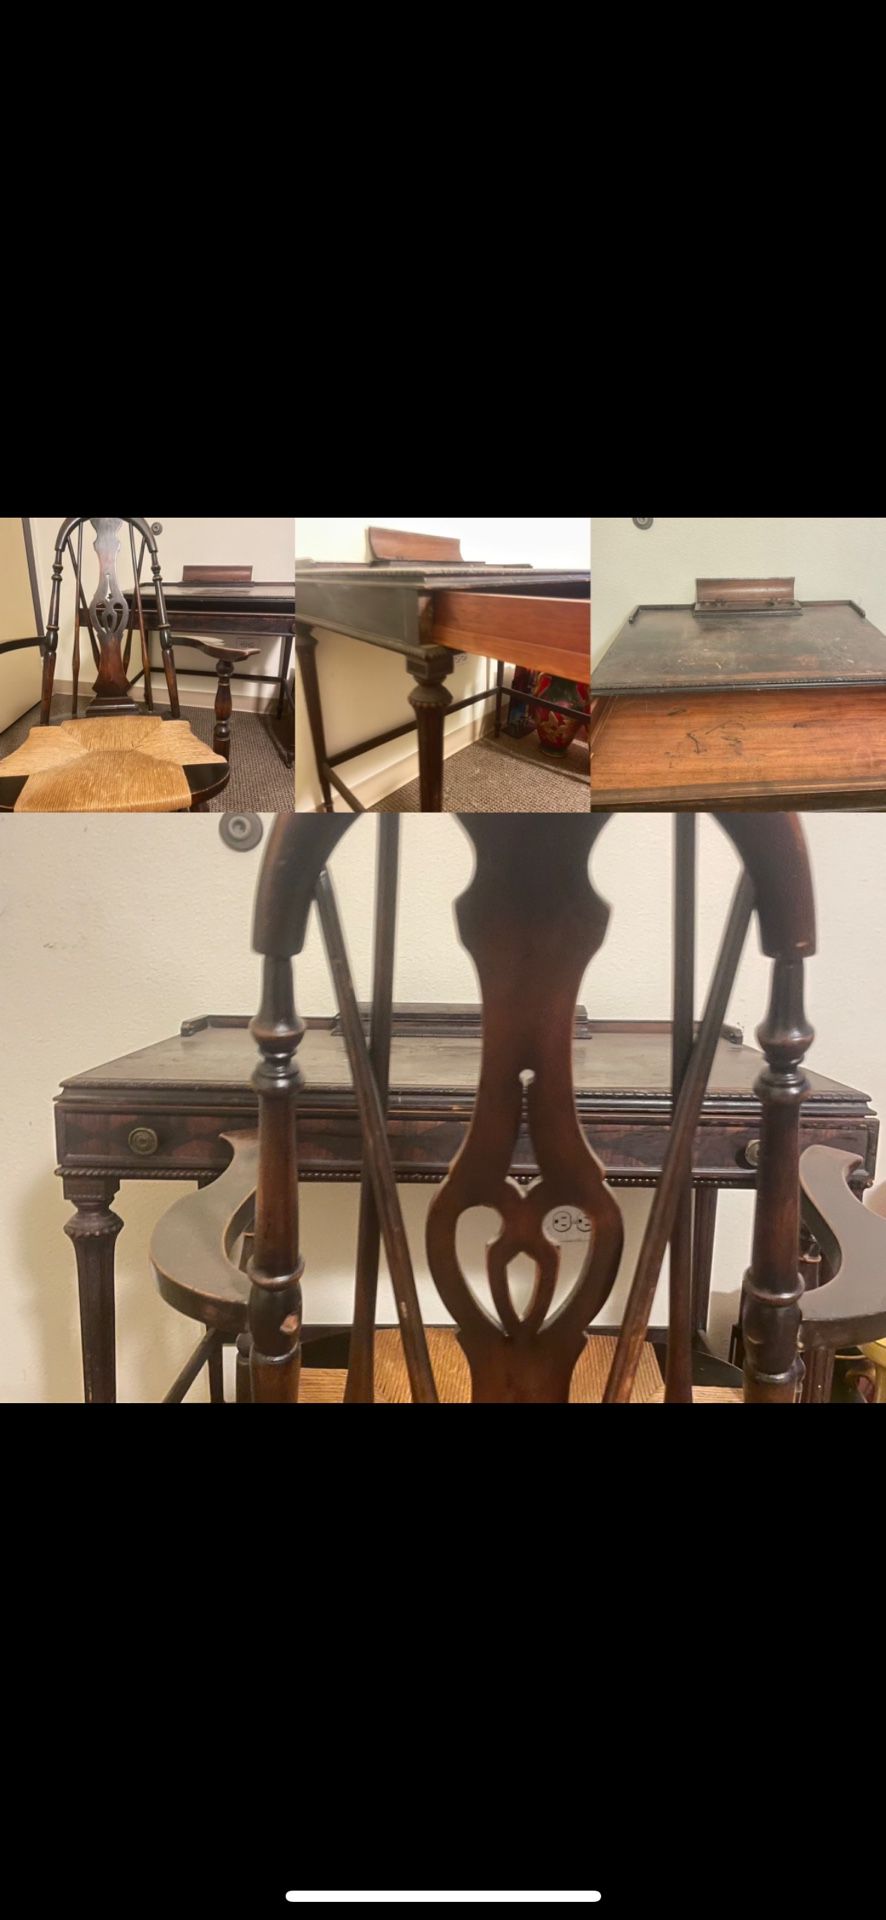 antique writers desk AND chair